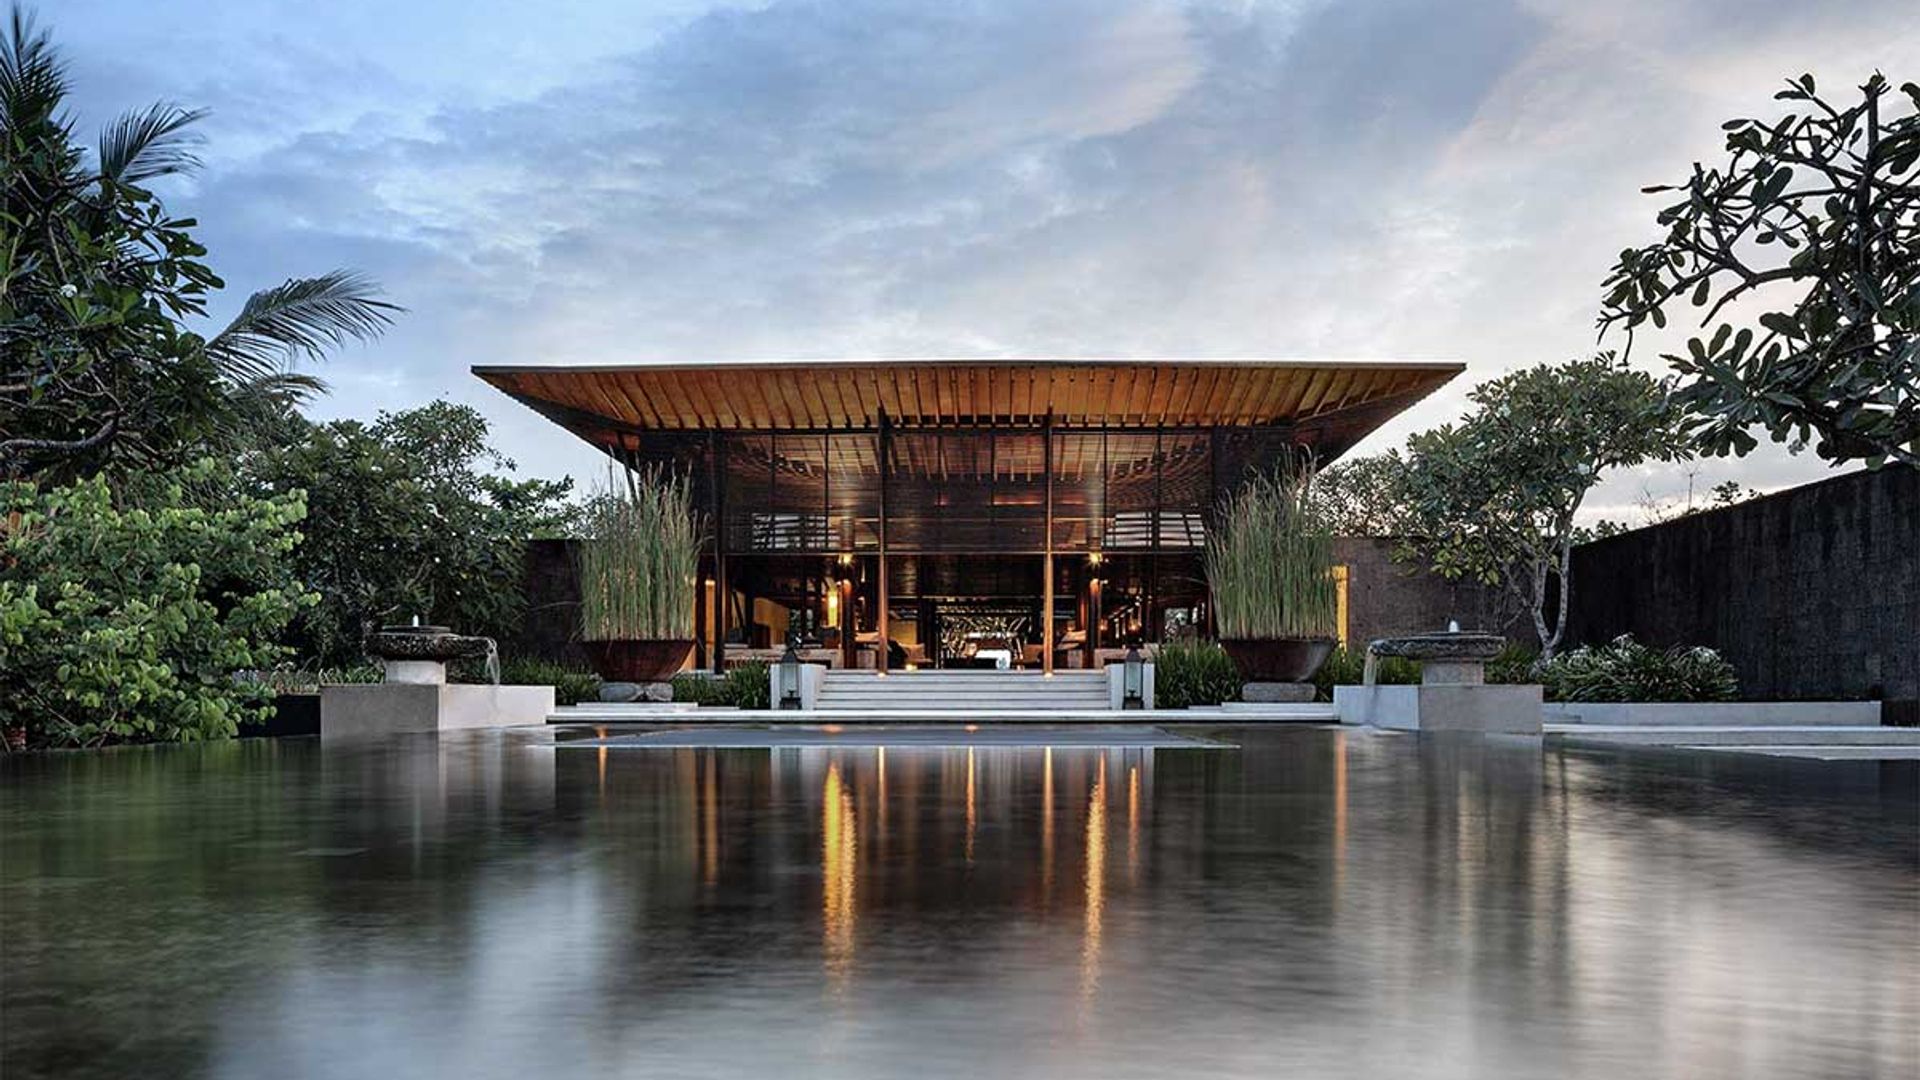 This is the resort that the Kardashians stayed at in Bali - see all the photos!